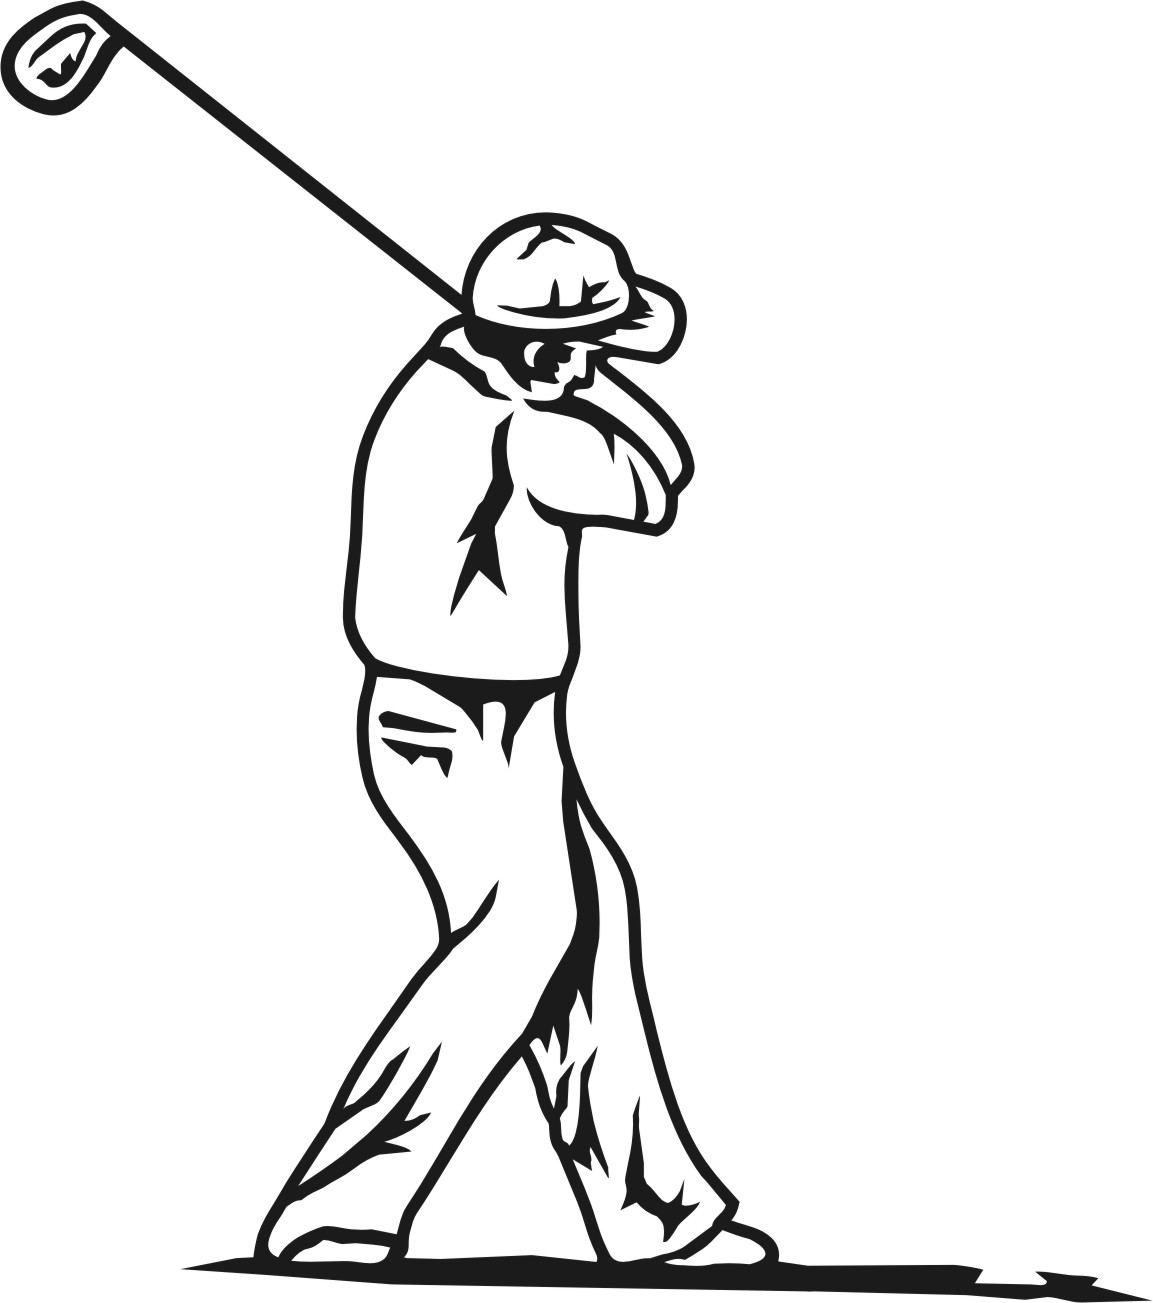 Golf Drawings information